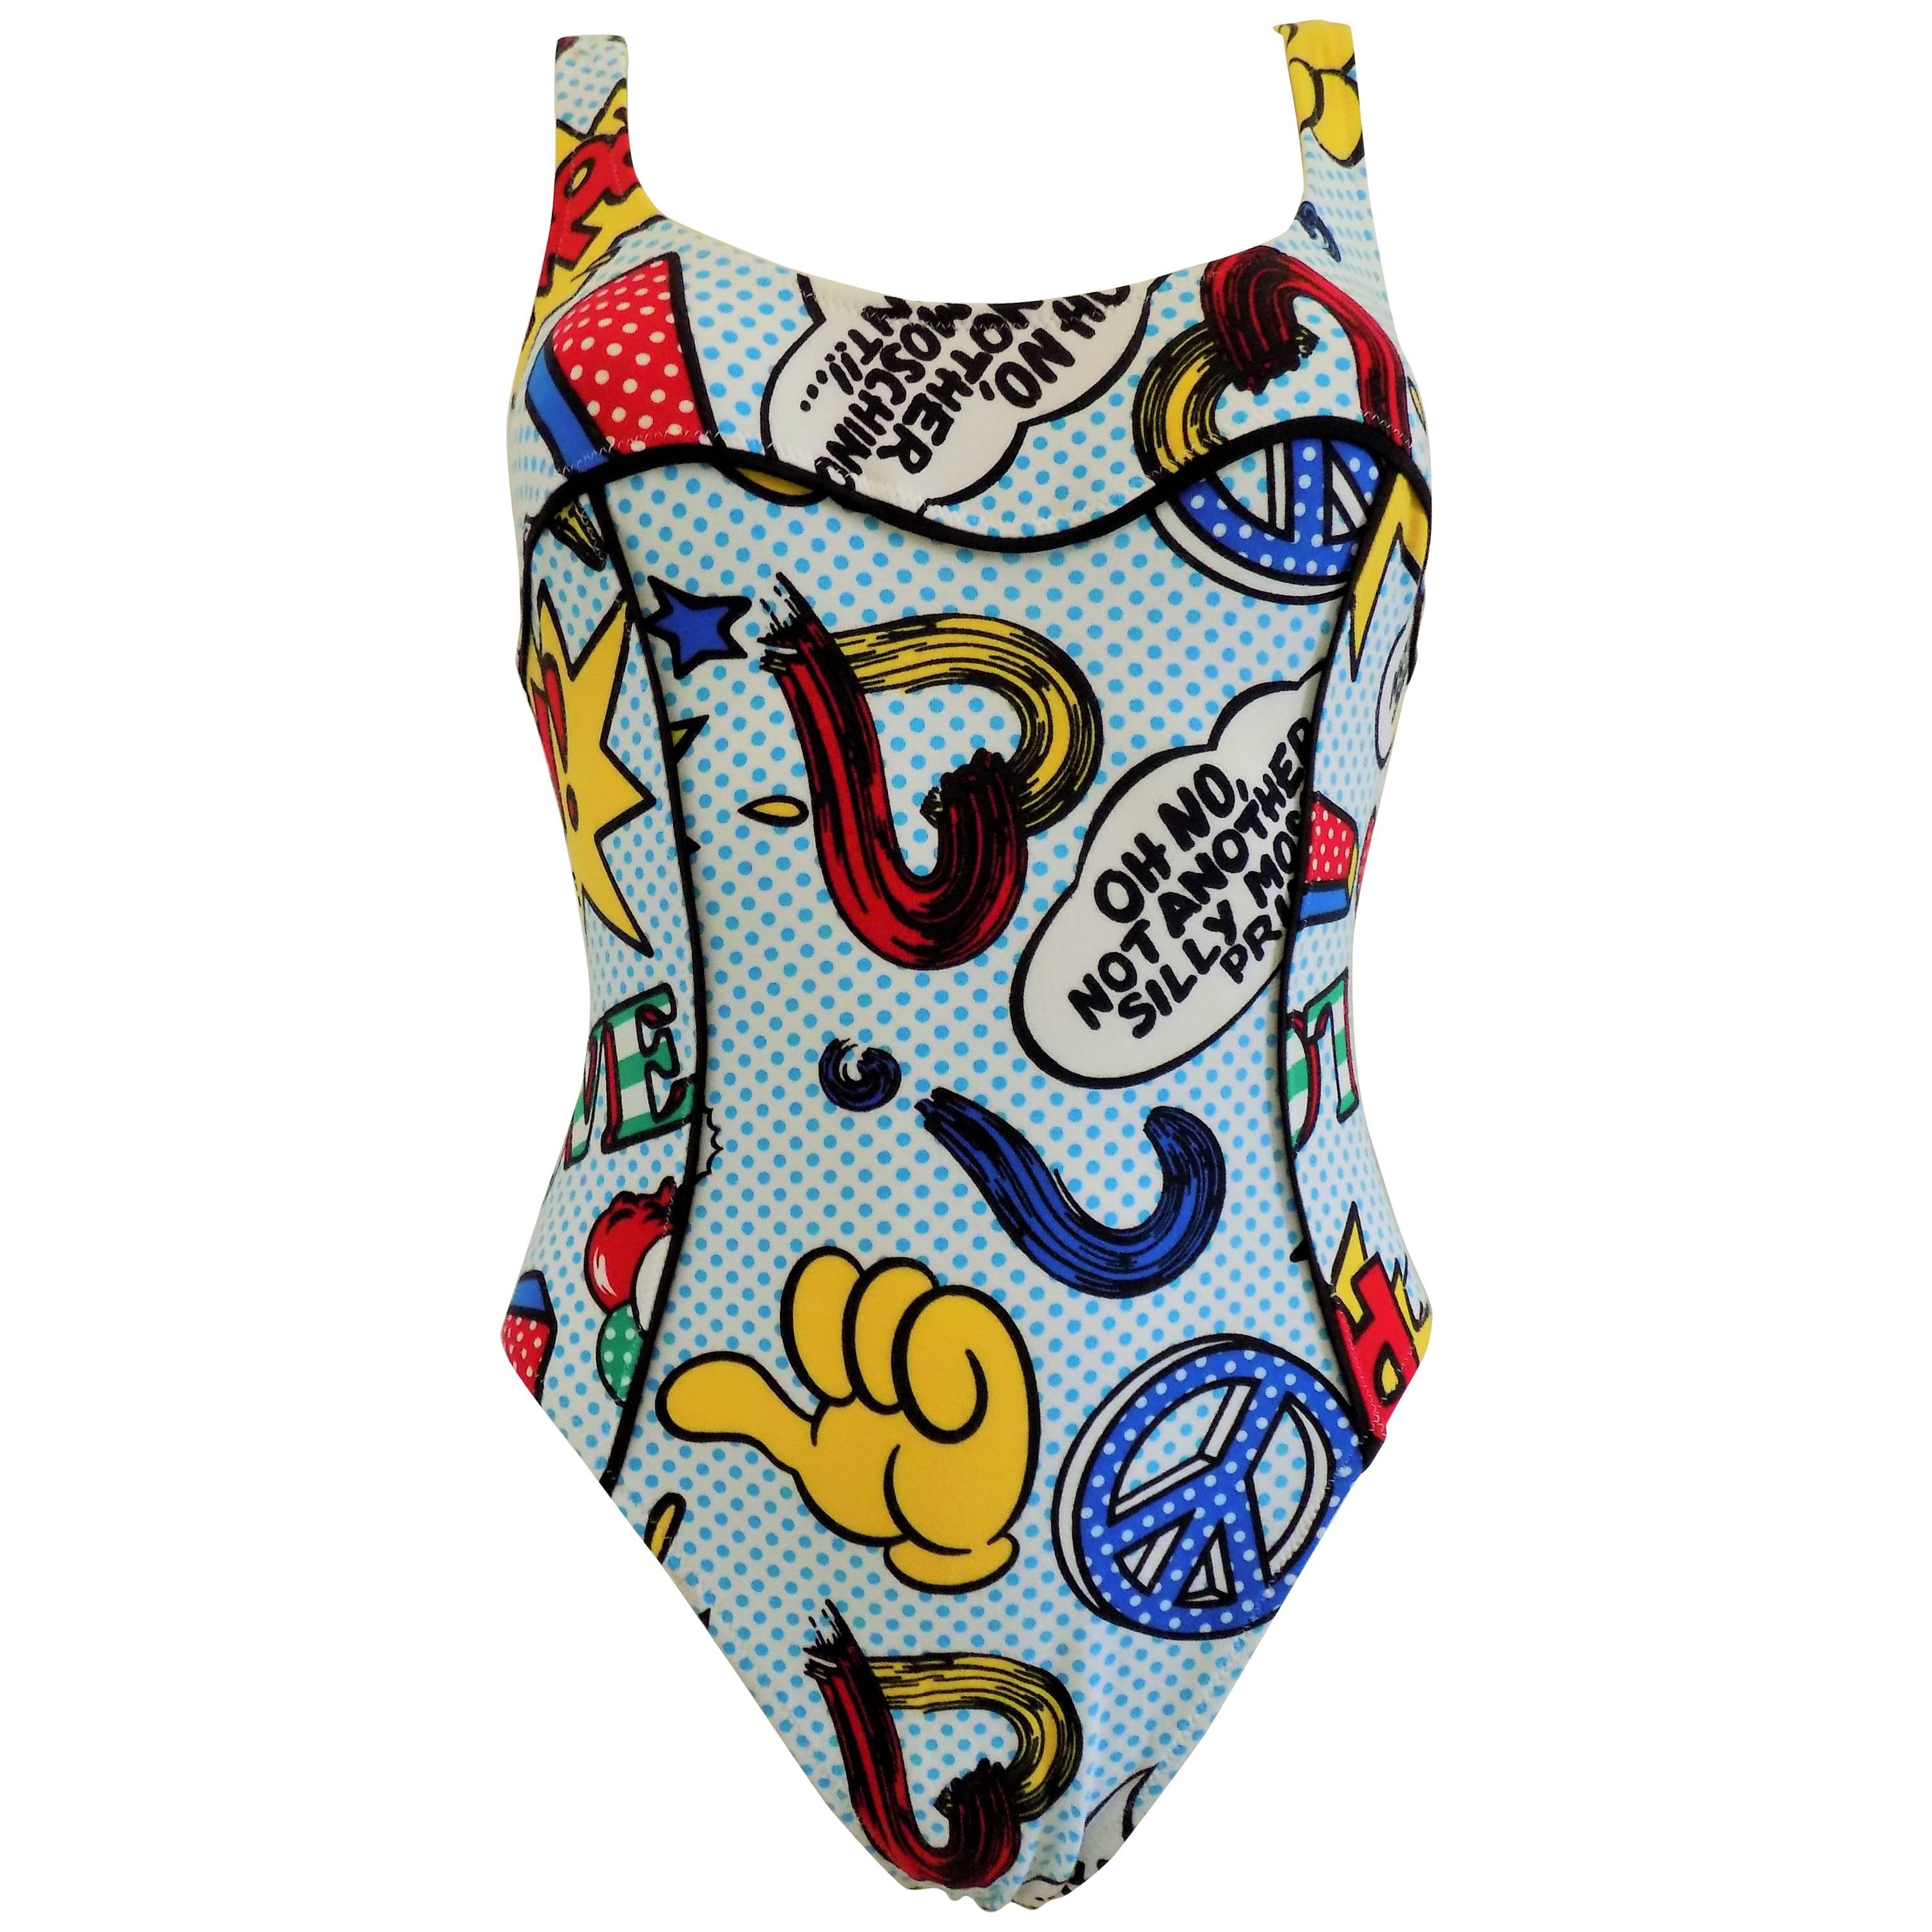 1980s Moschino Mare Pop art swimwear "oh no, not another silly moschino print"